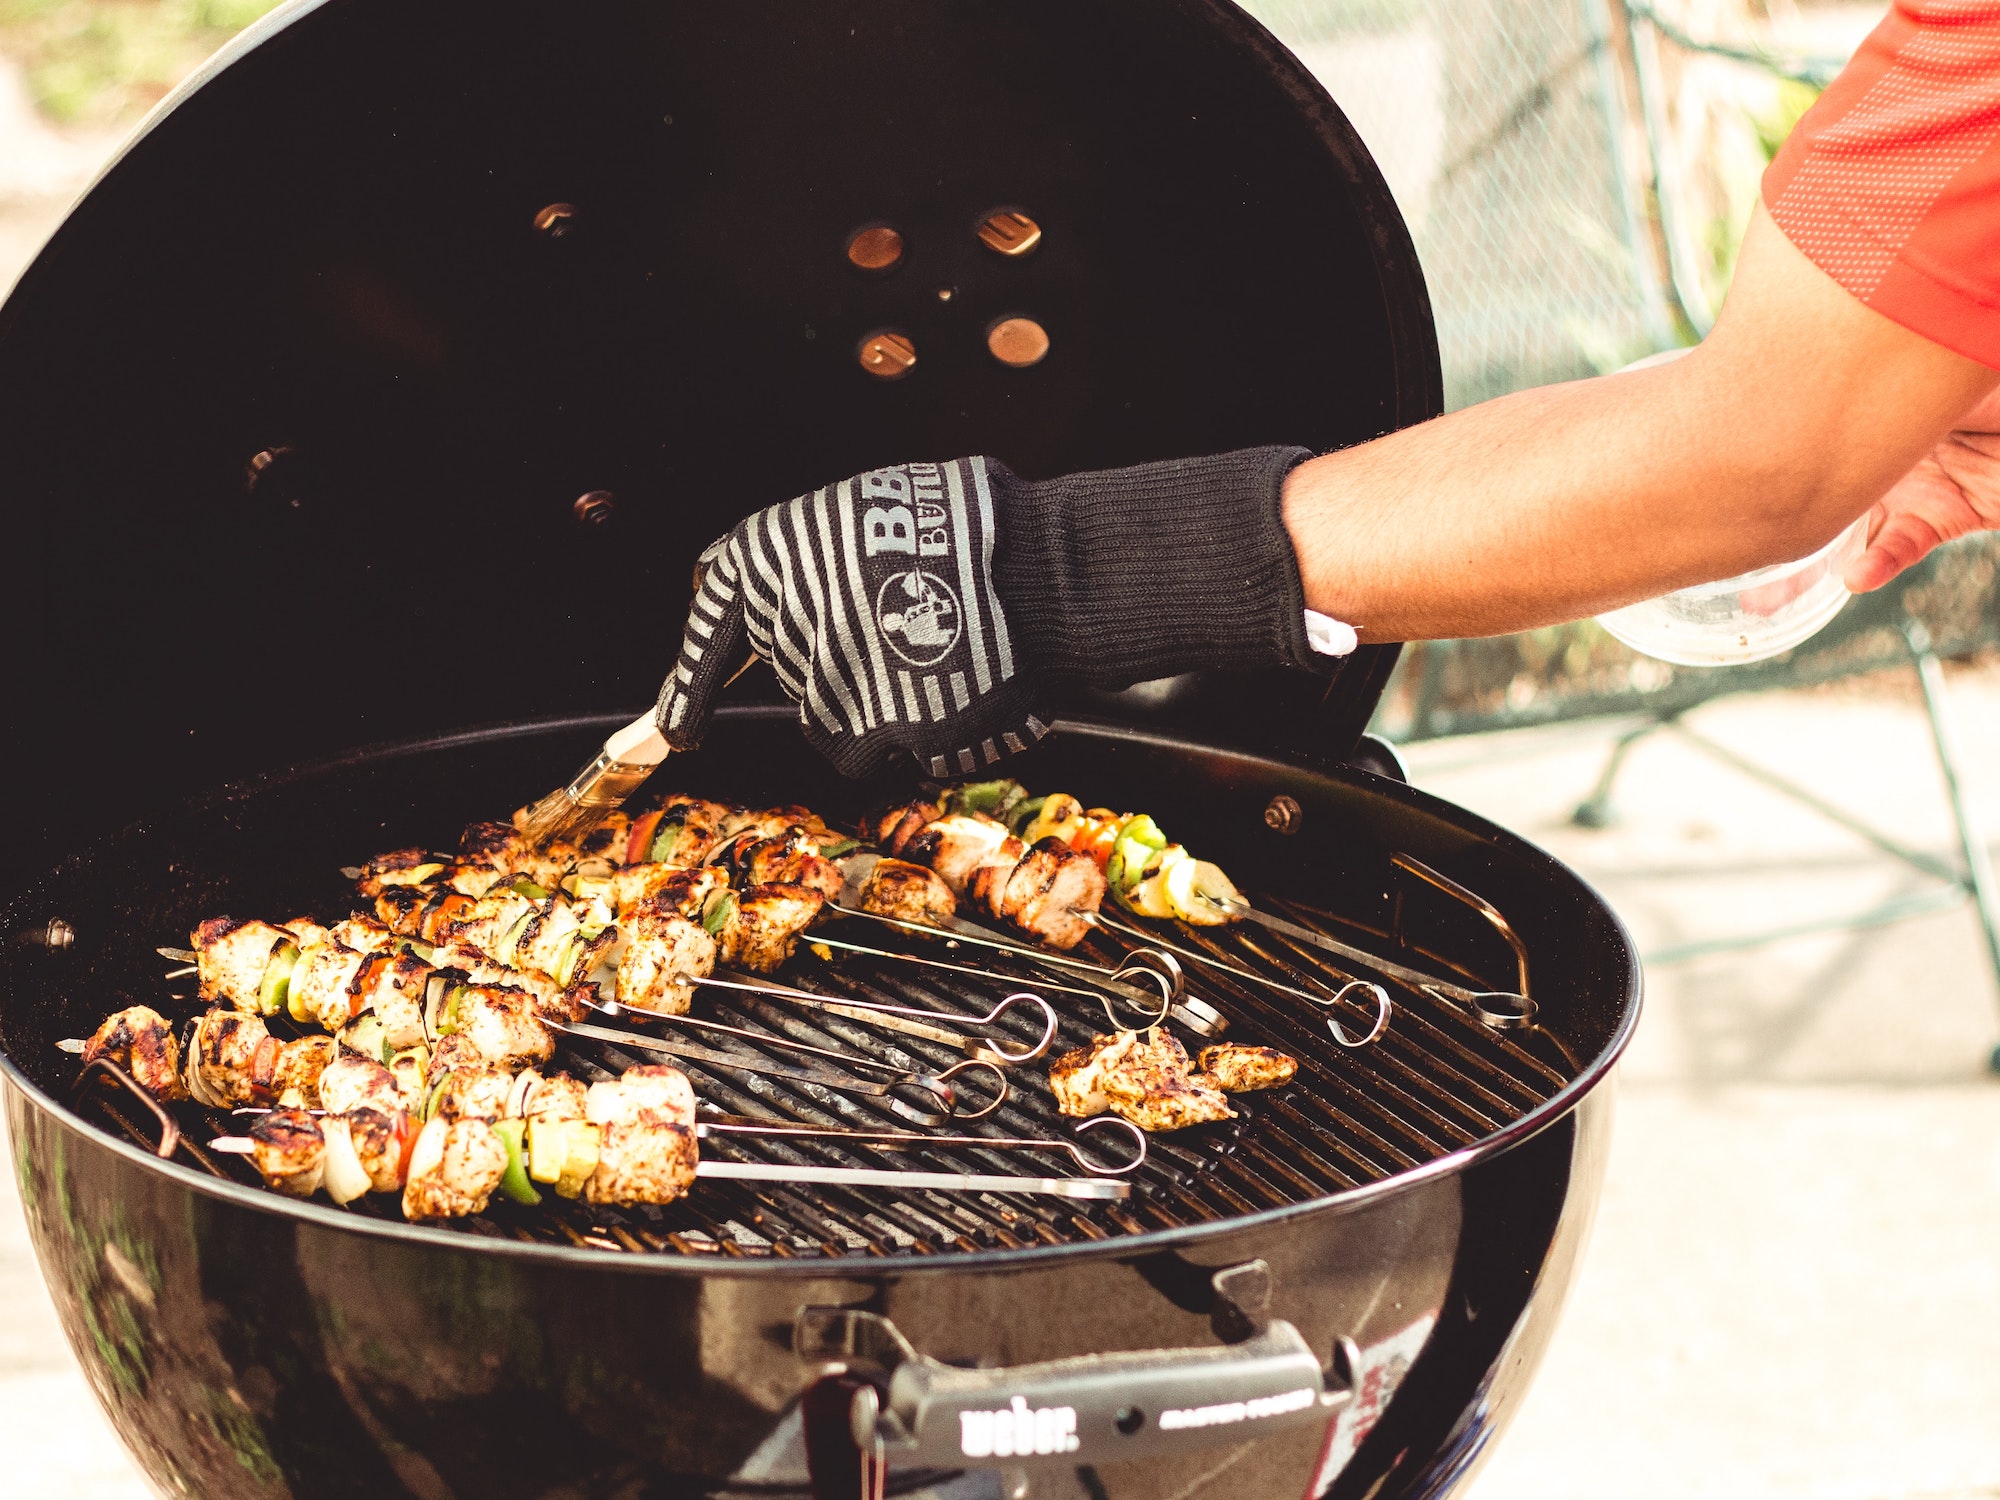 How to get your barbecue grill ready for summer